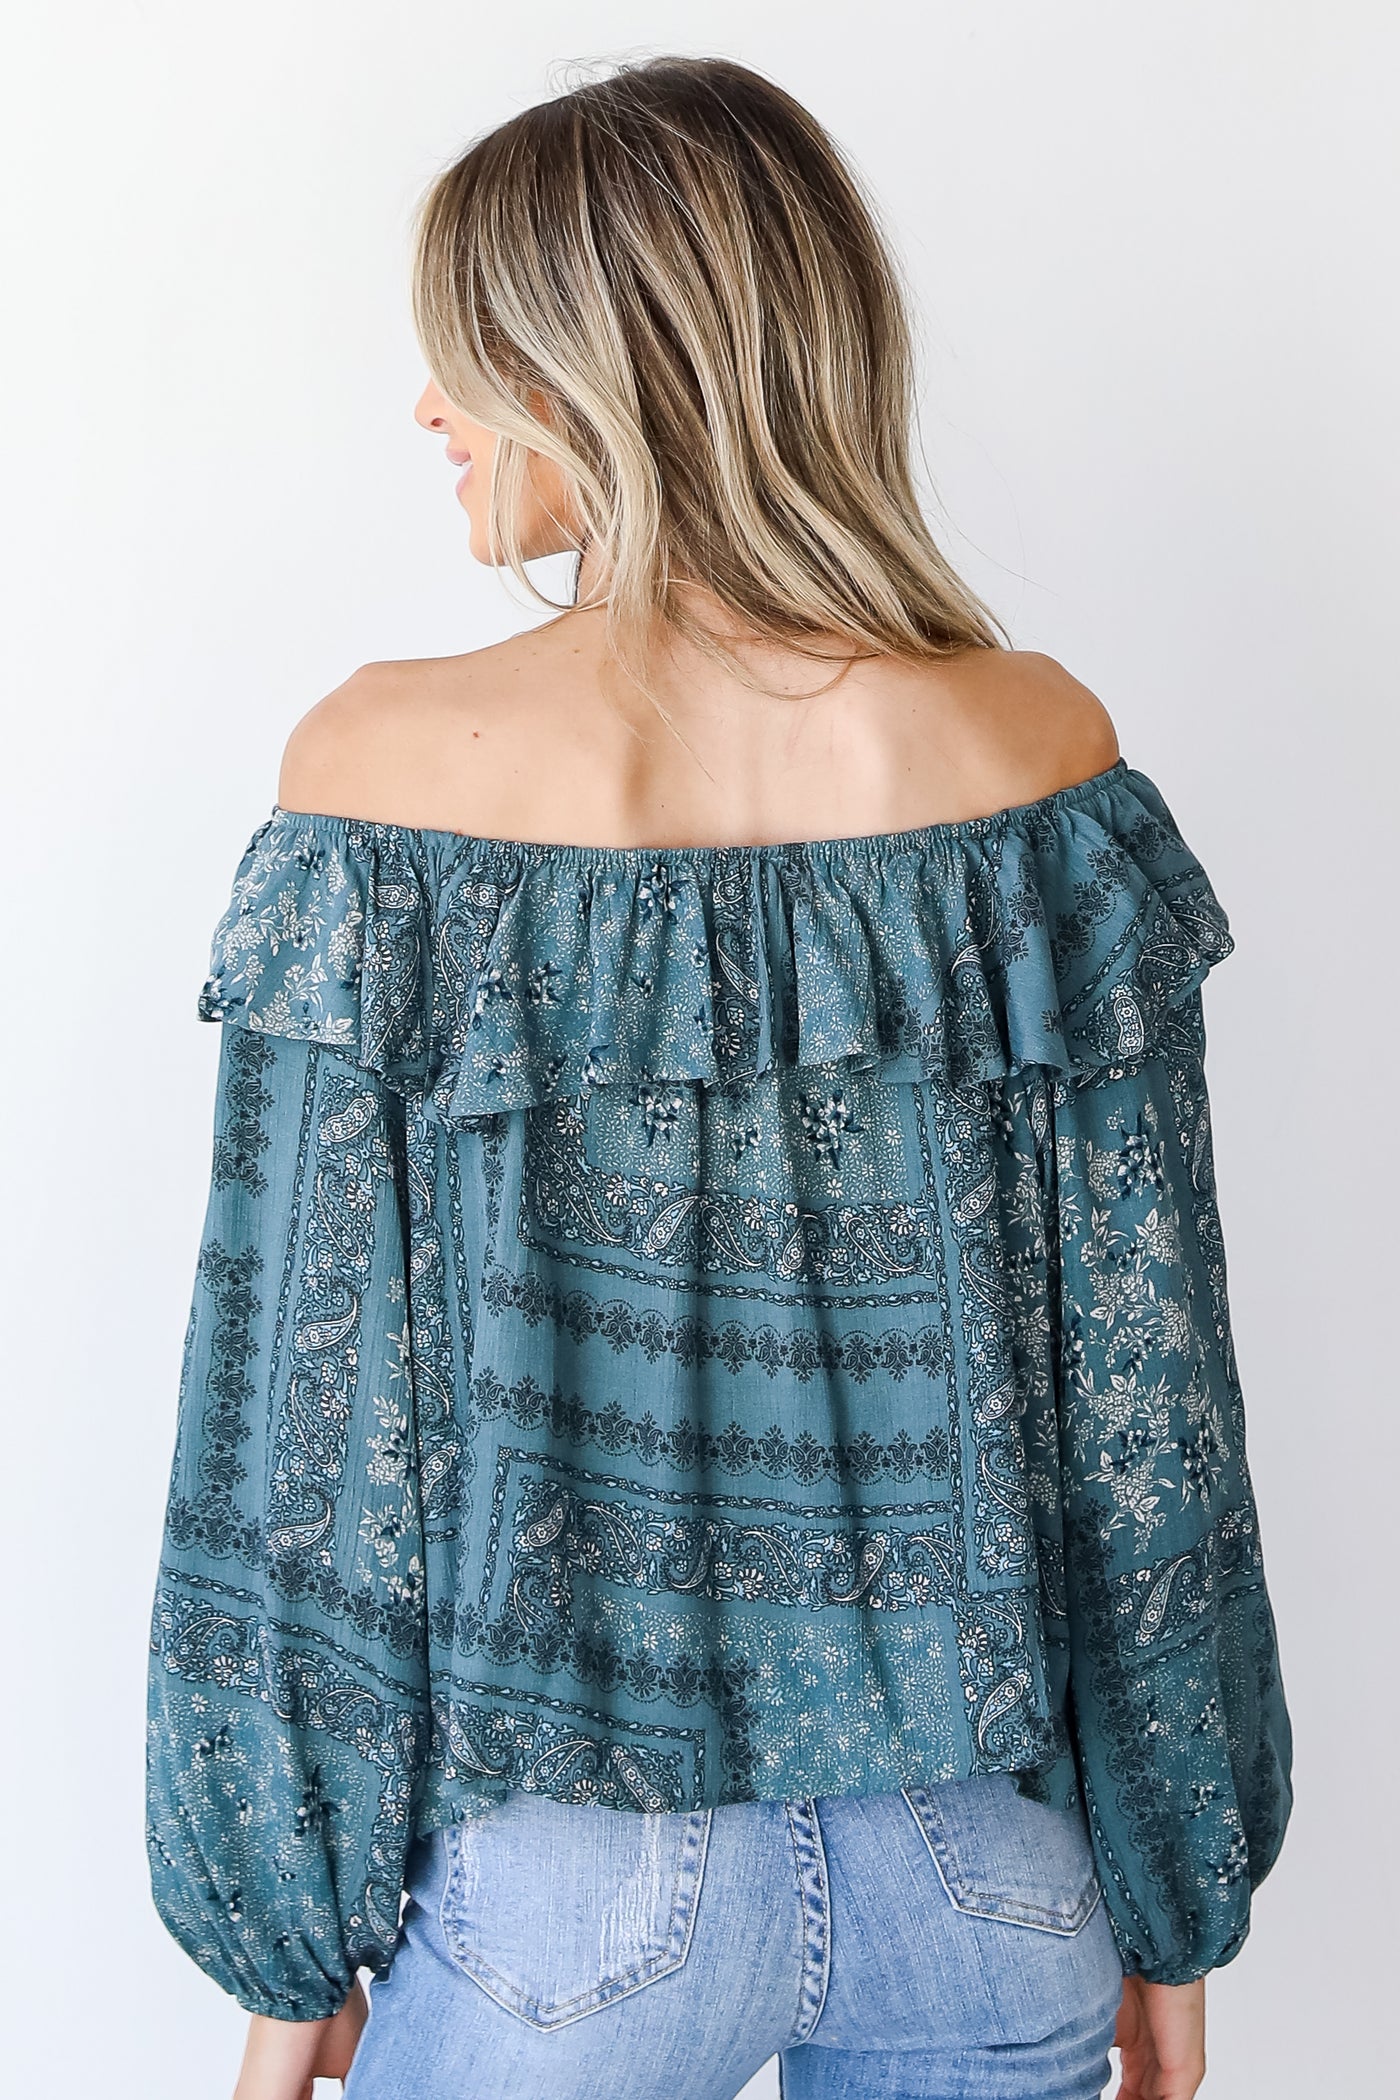 Floral Ruffle Blouse in teal back view